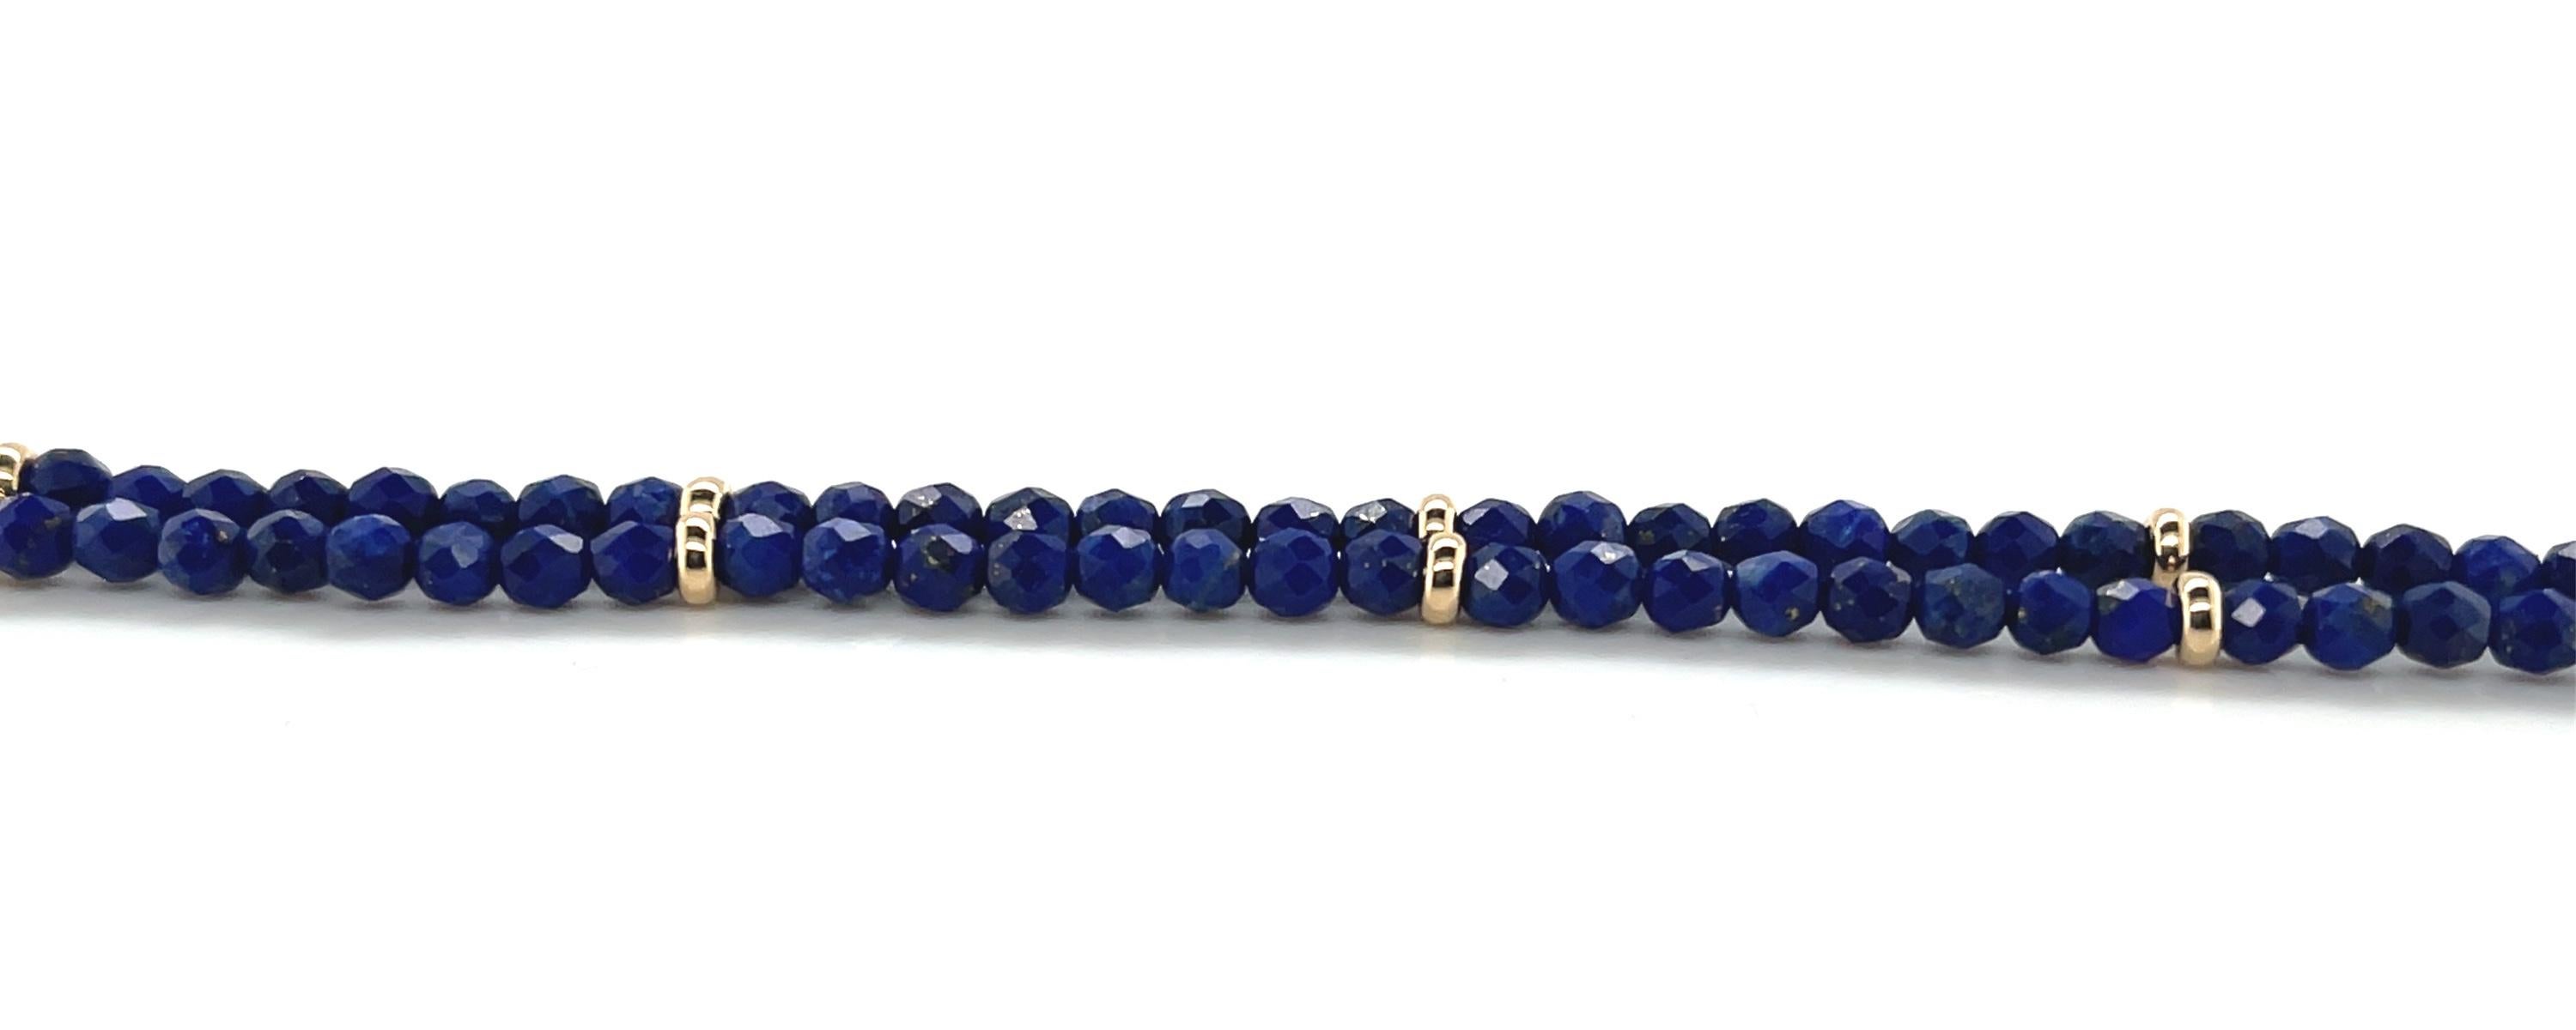 Faceted Lapis Bead Necklace with Yellow Gold Accents, 34 Inches 1